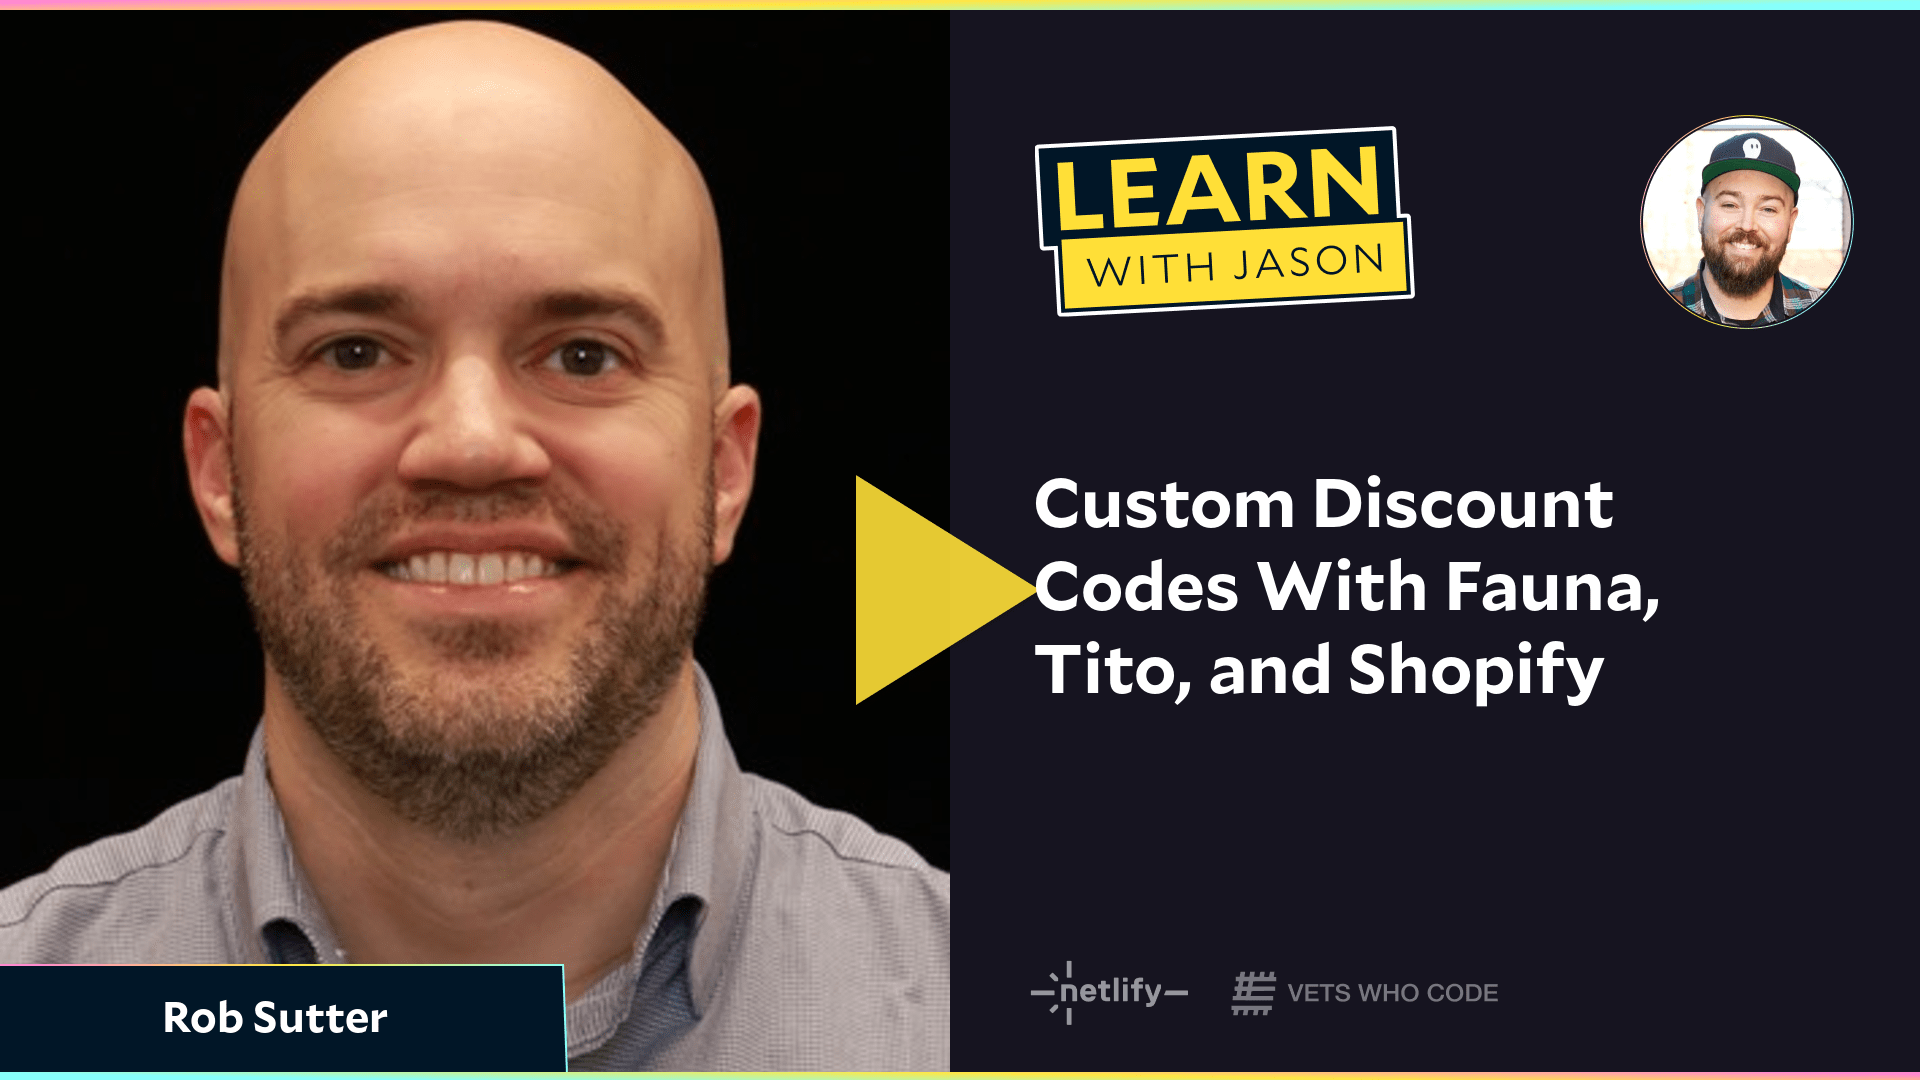 Custom Discount Codes With Fauna, Tito, and Shopify (with Rob Sutter)